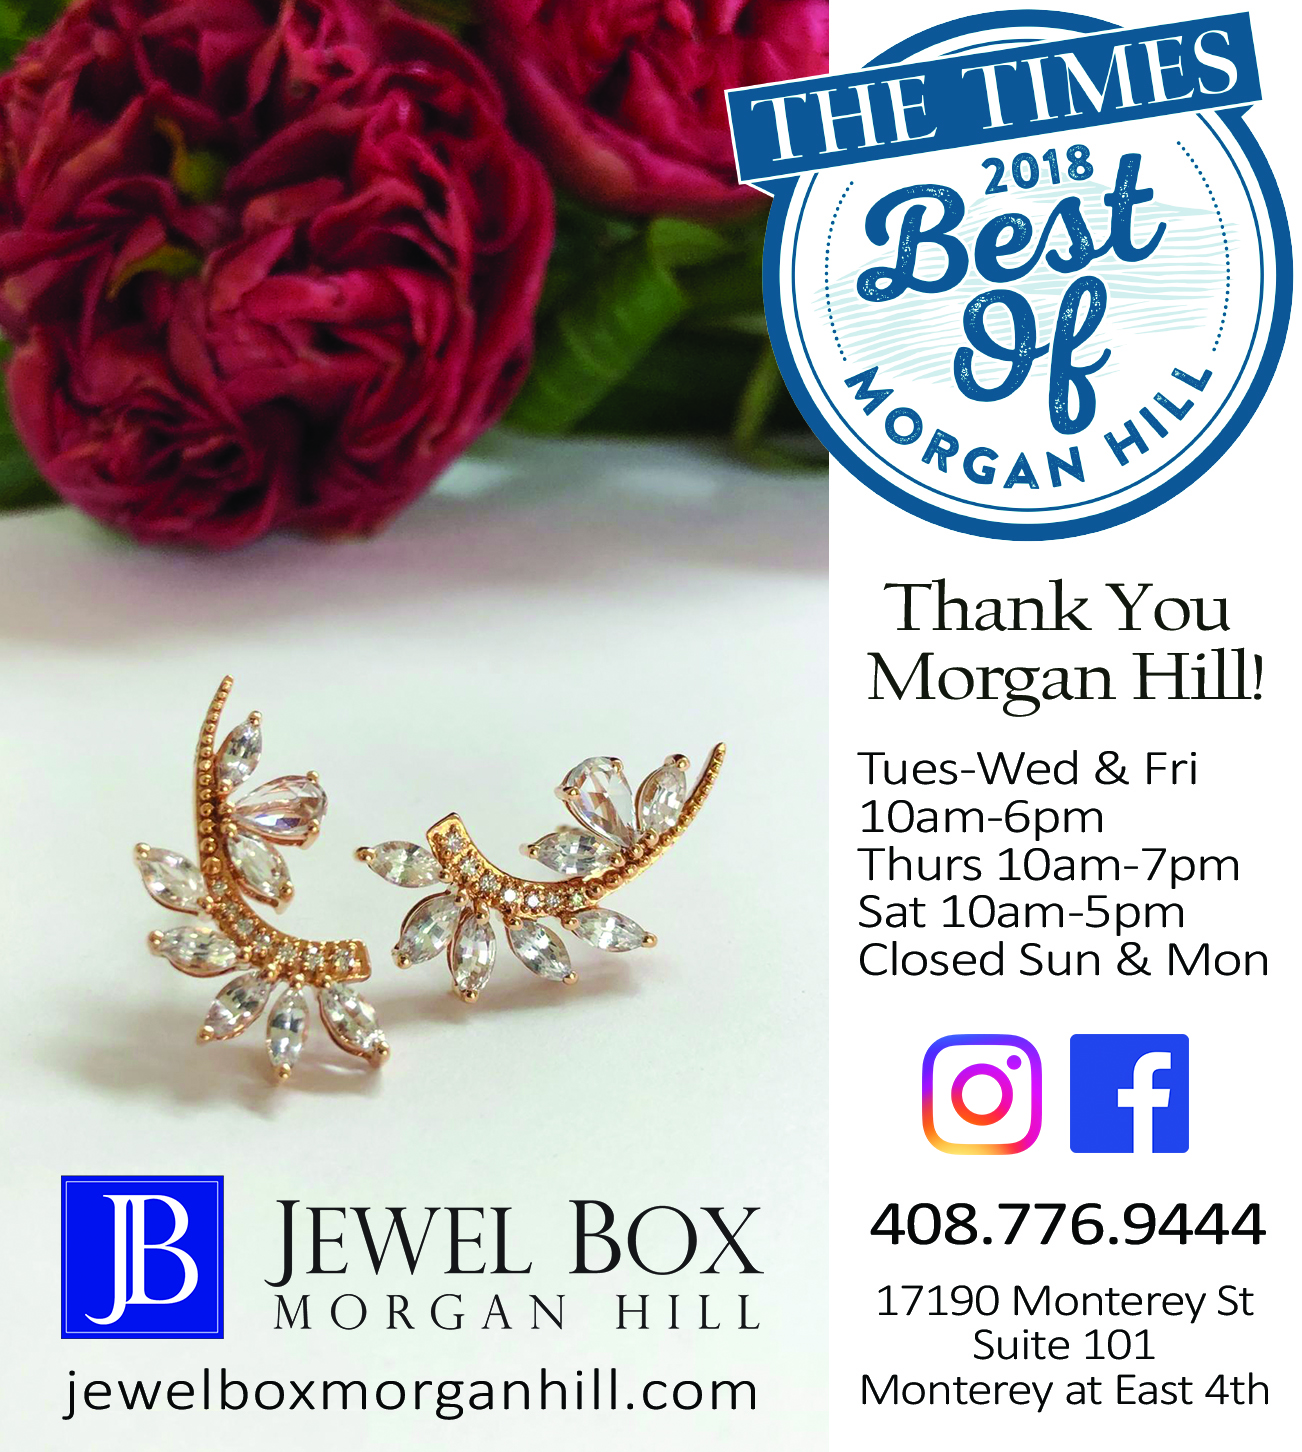 jewel box of morgan hill jewelry and business information